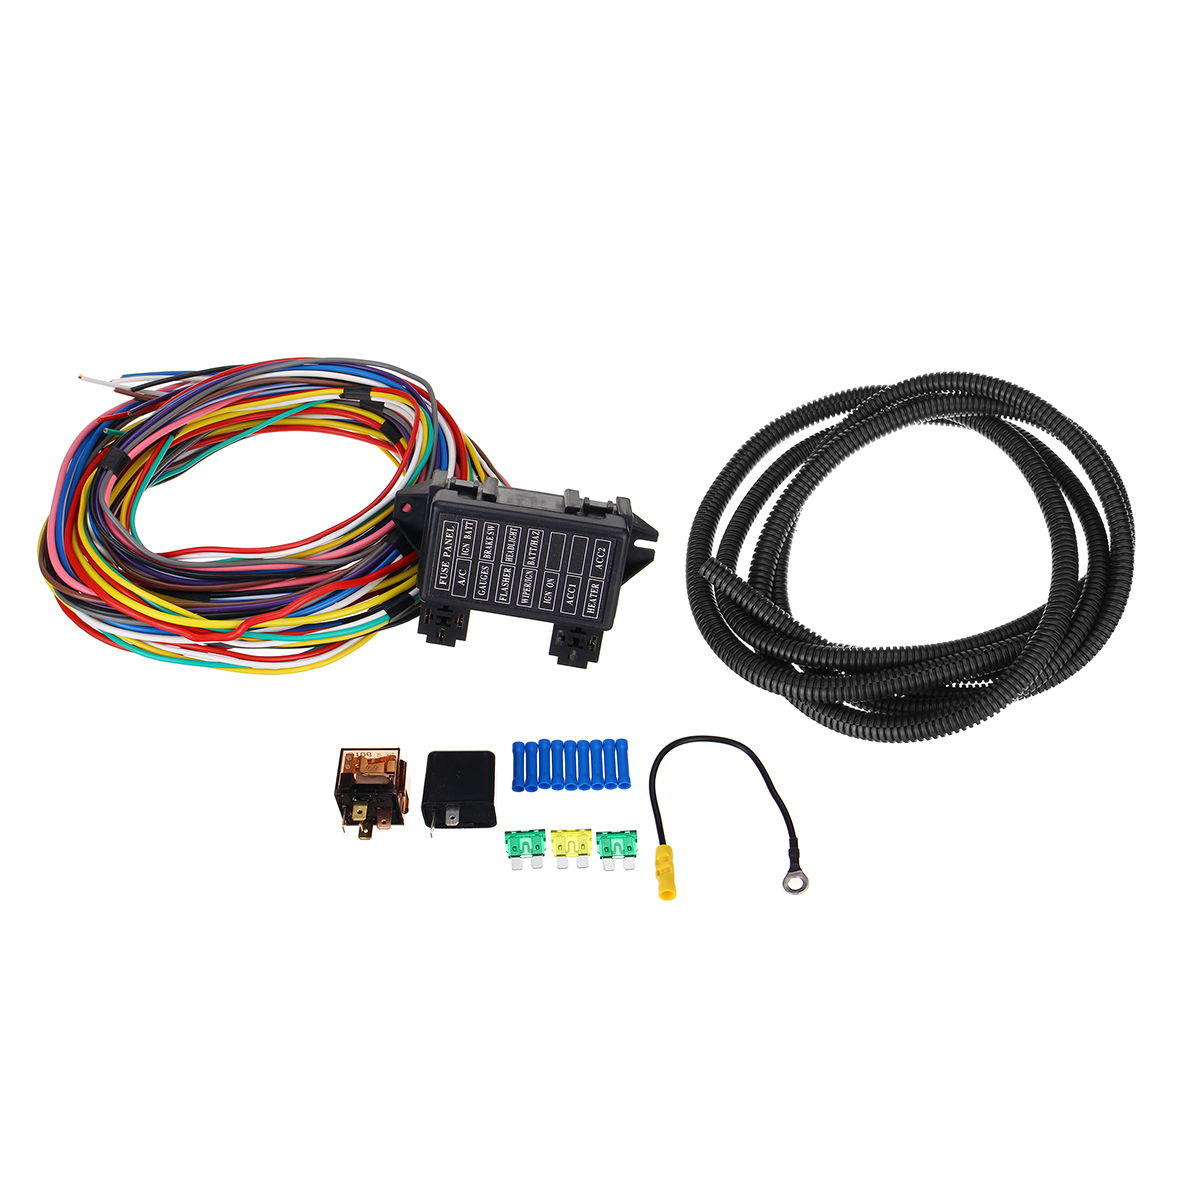 Find 14 Circuit Universal Wiring Harness Bumper Wire Kit 12V Durability Car Hot Rod Street Rod XL Wires for Sale on Gipsybee.com with cryptocurrencies